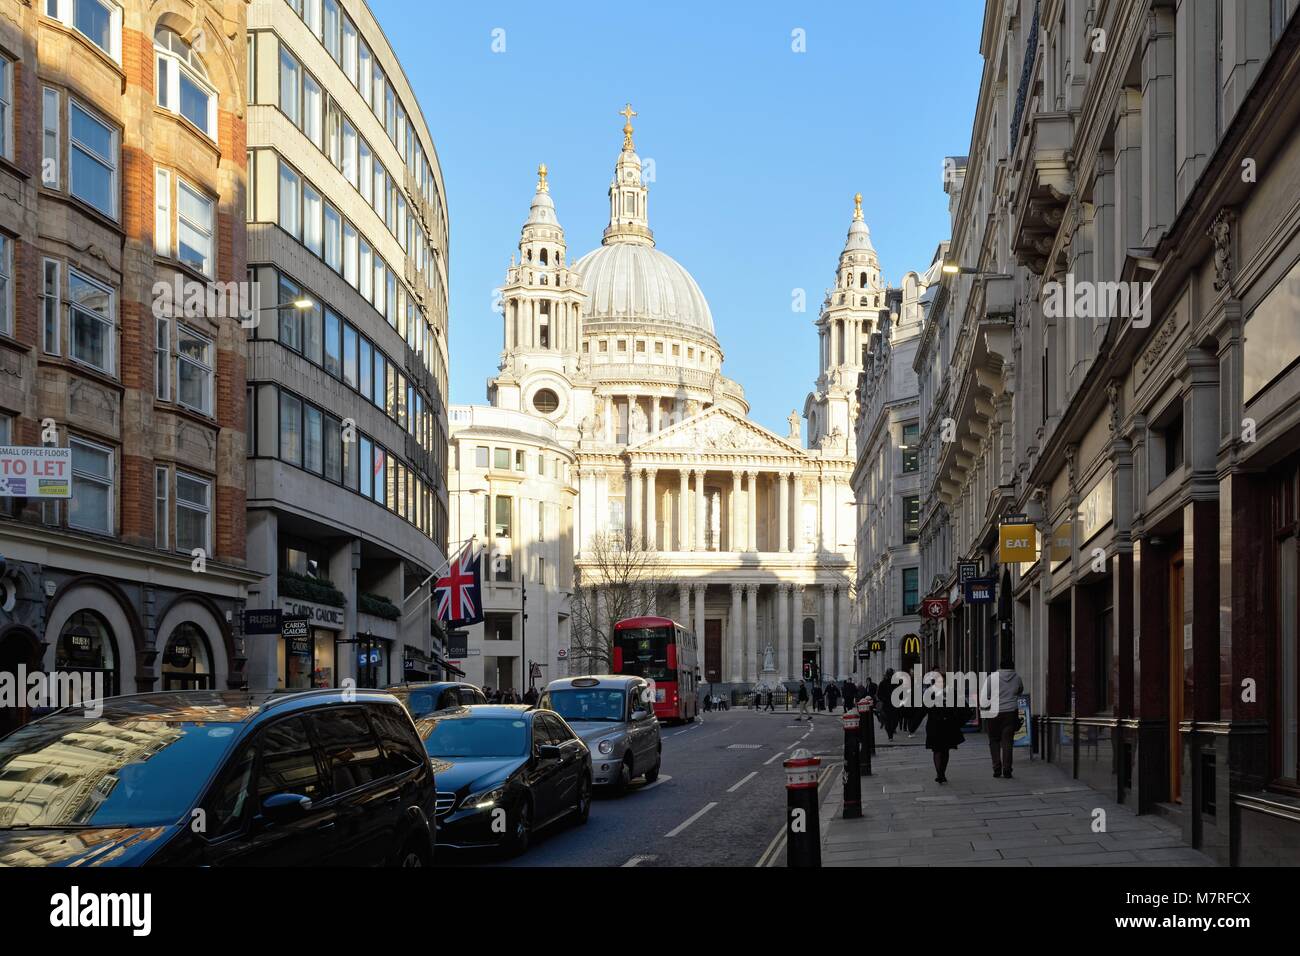 The view of St.Pauls cathedral from Ludgate Hill, City of London England UK Stock Photo